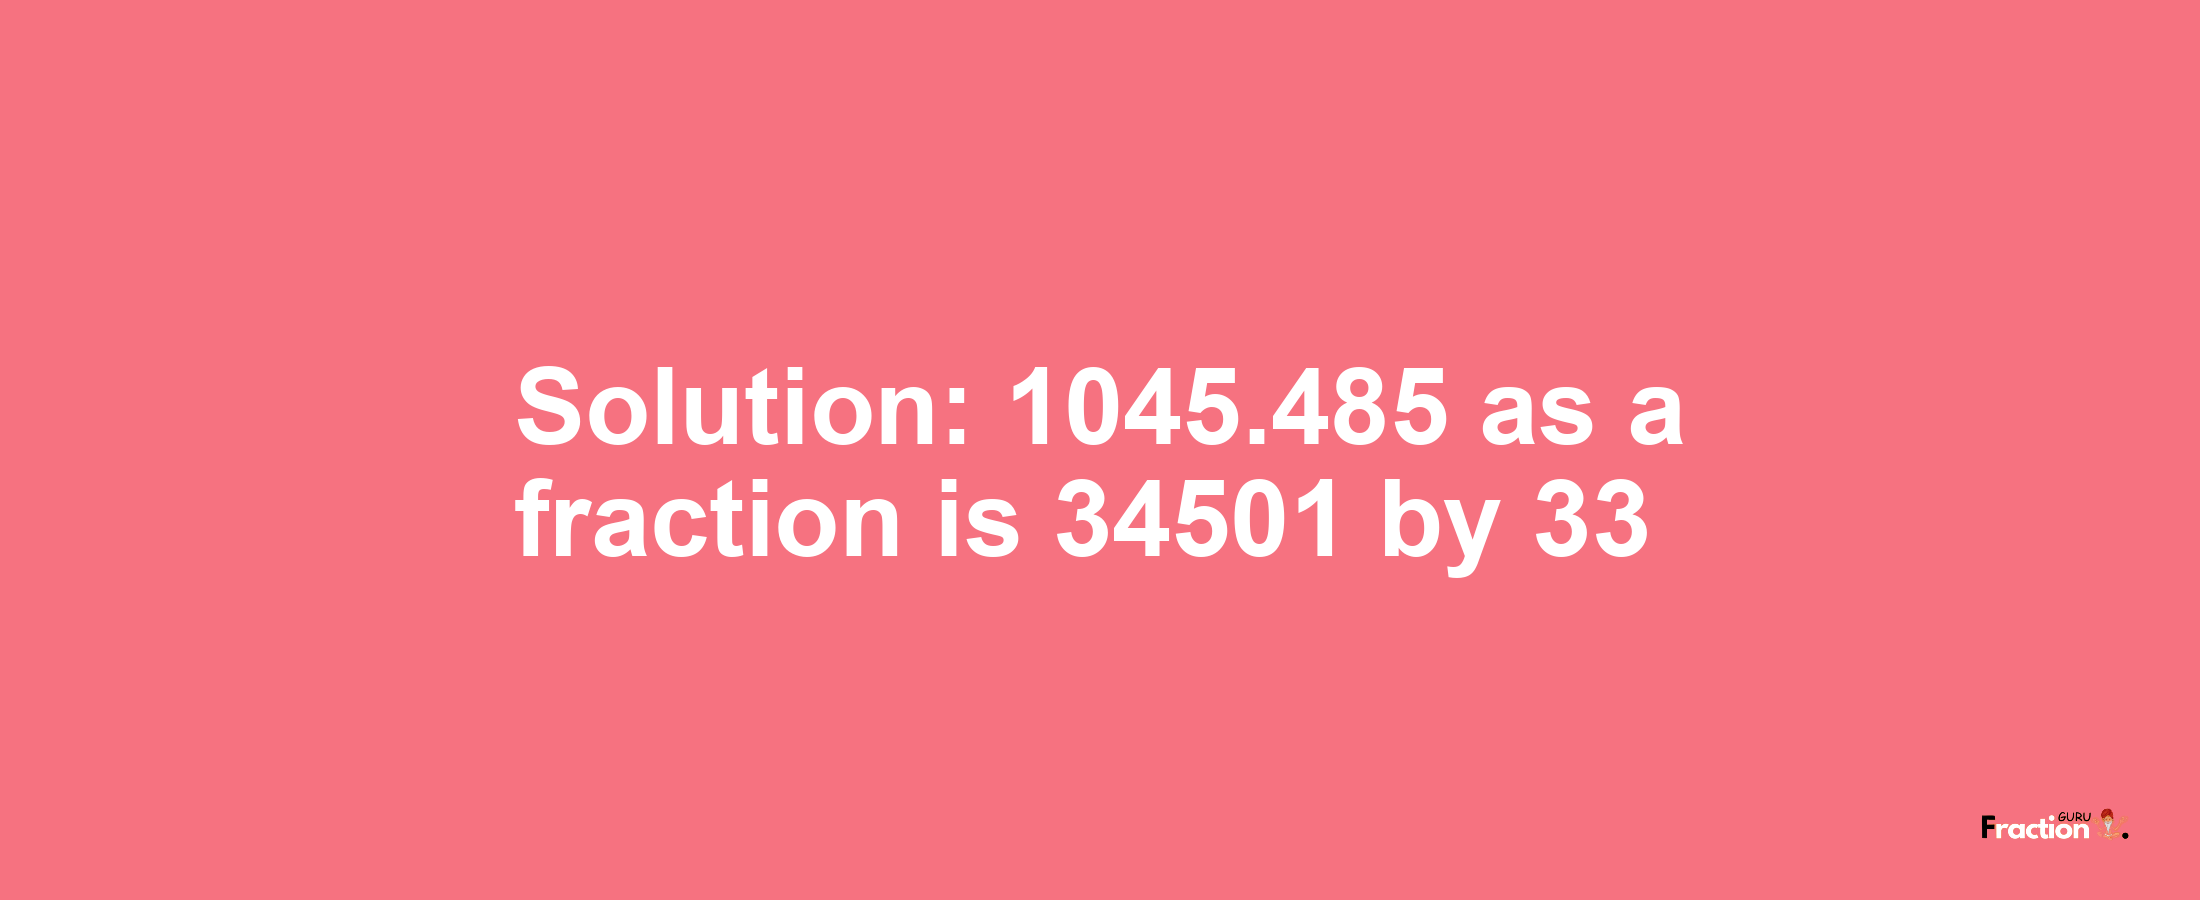 Solution:1045.485 as a fraction is 34501/33